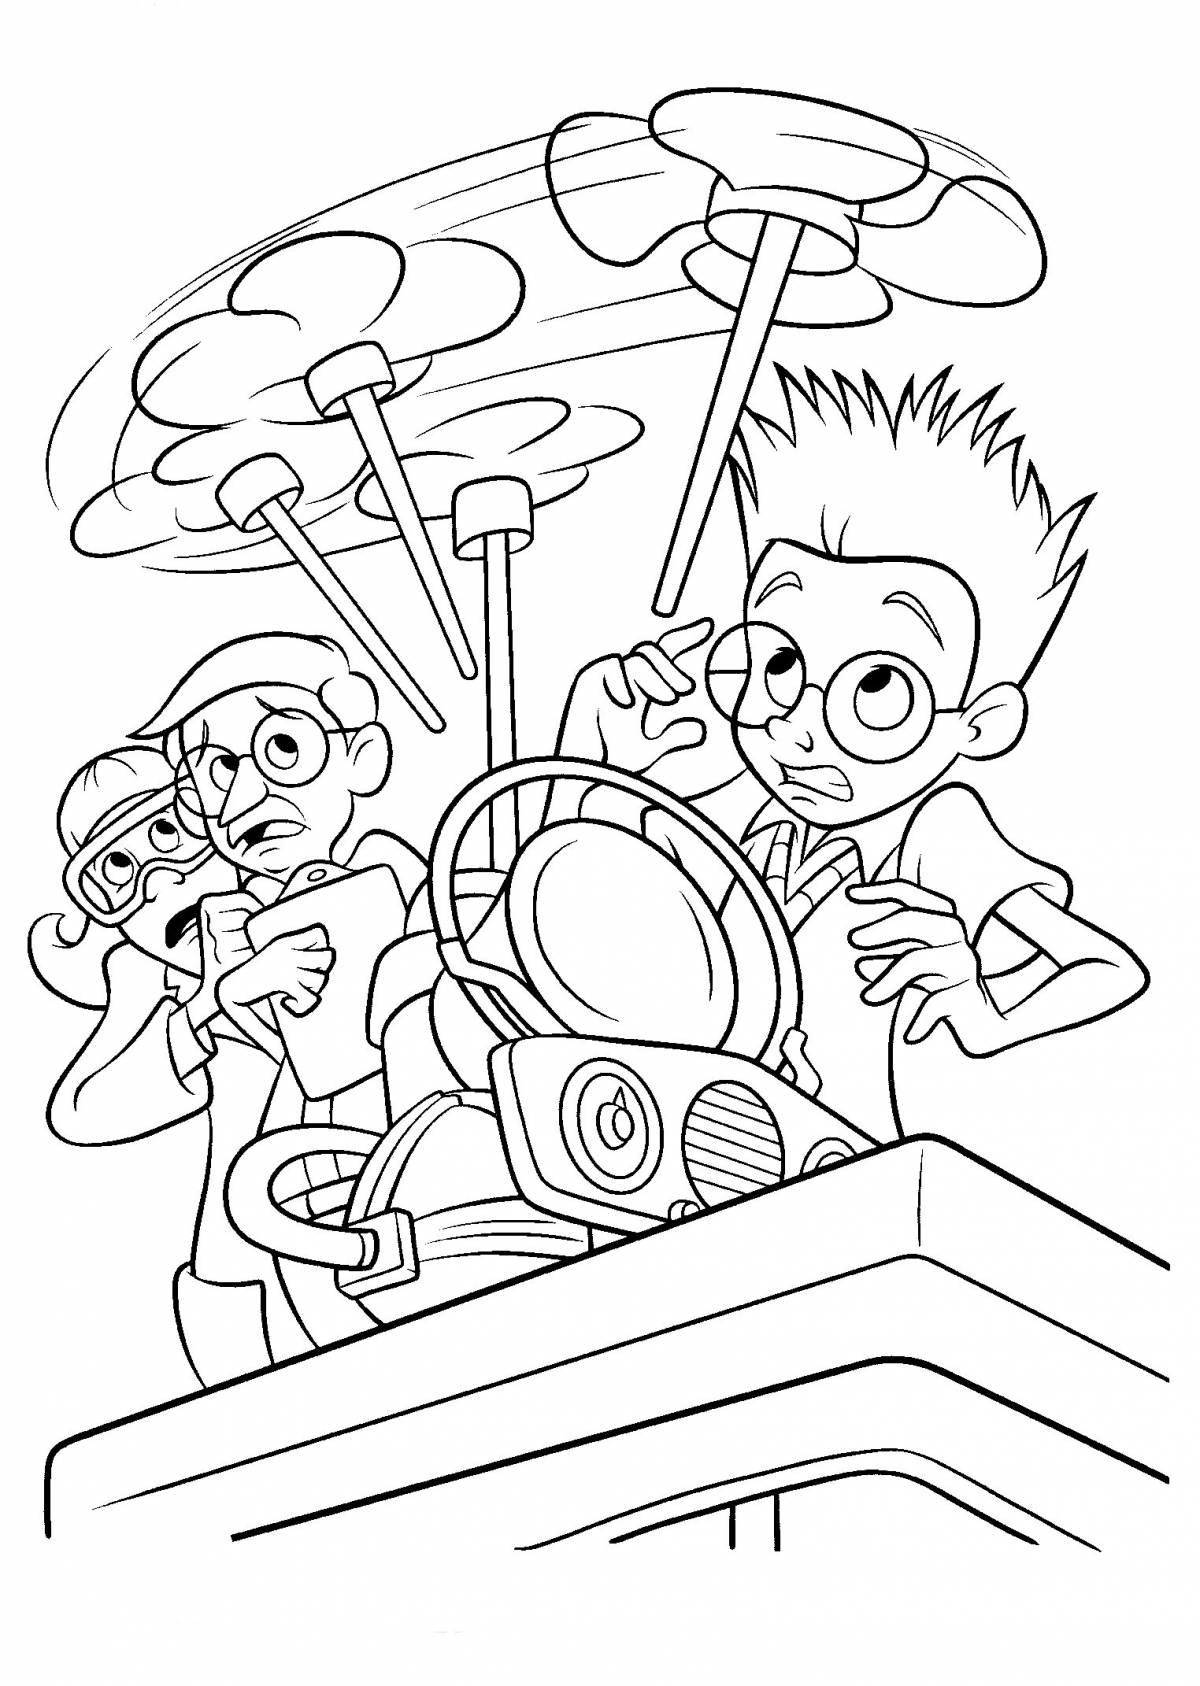 Color-zestful children's inventions coloring page